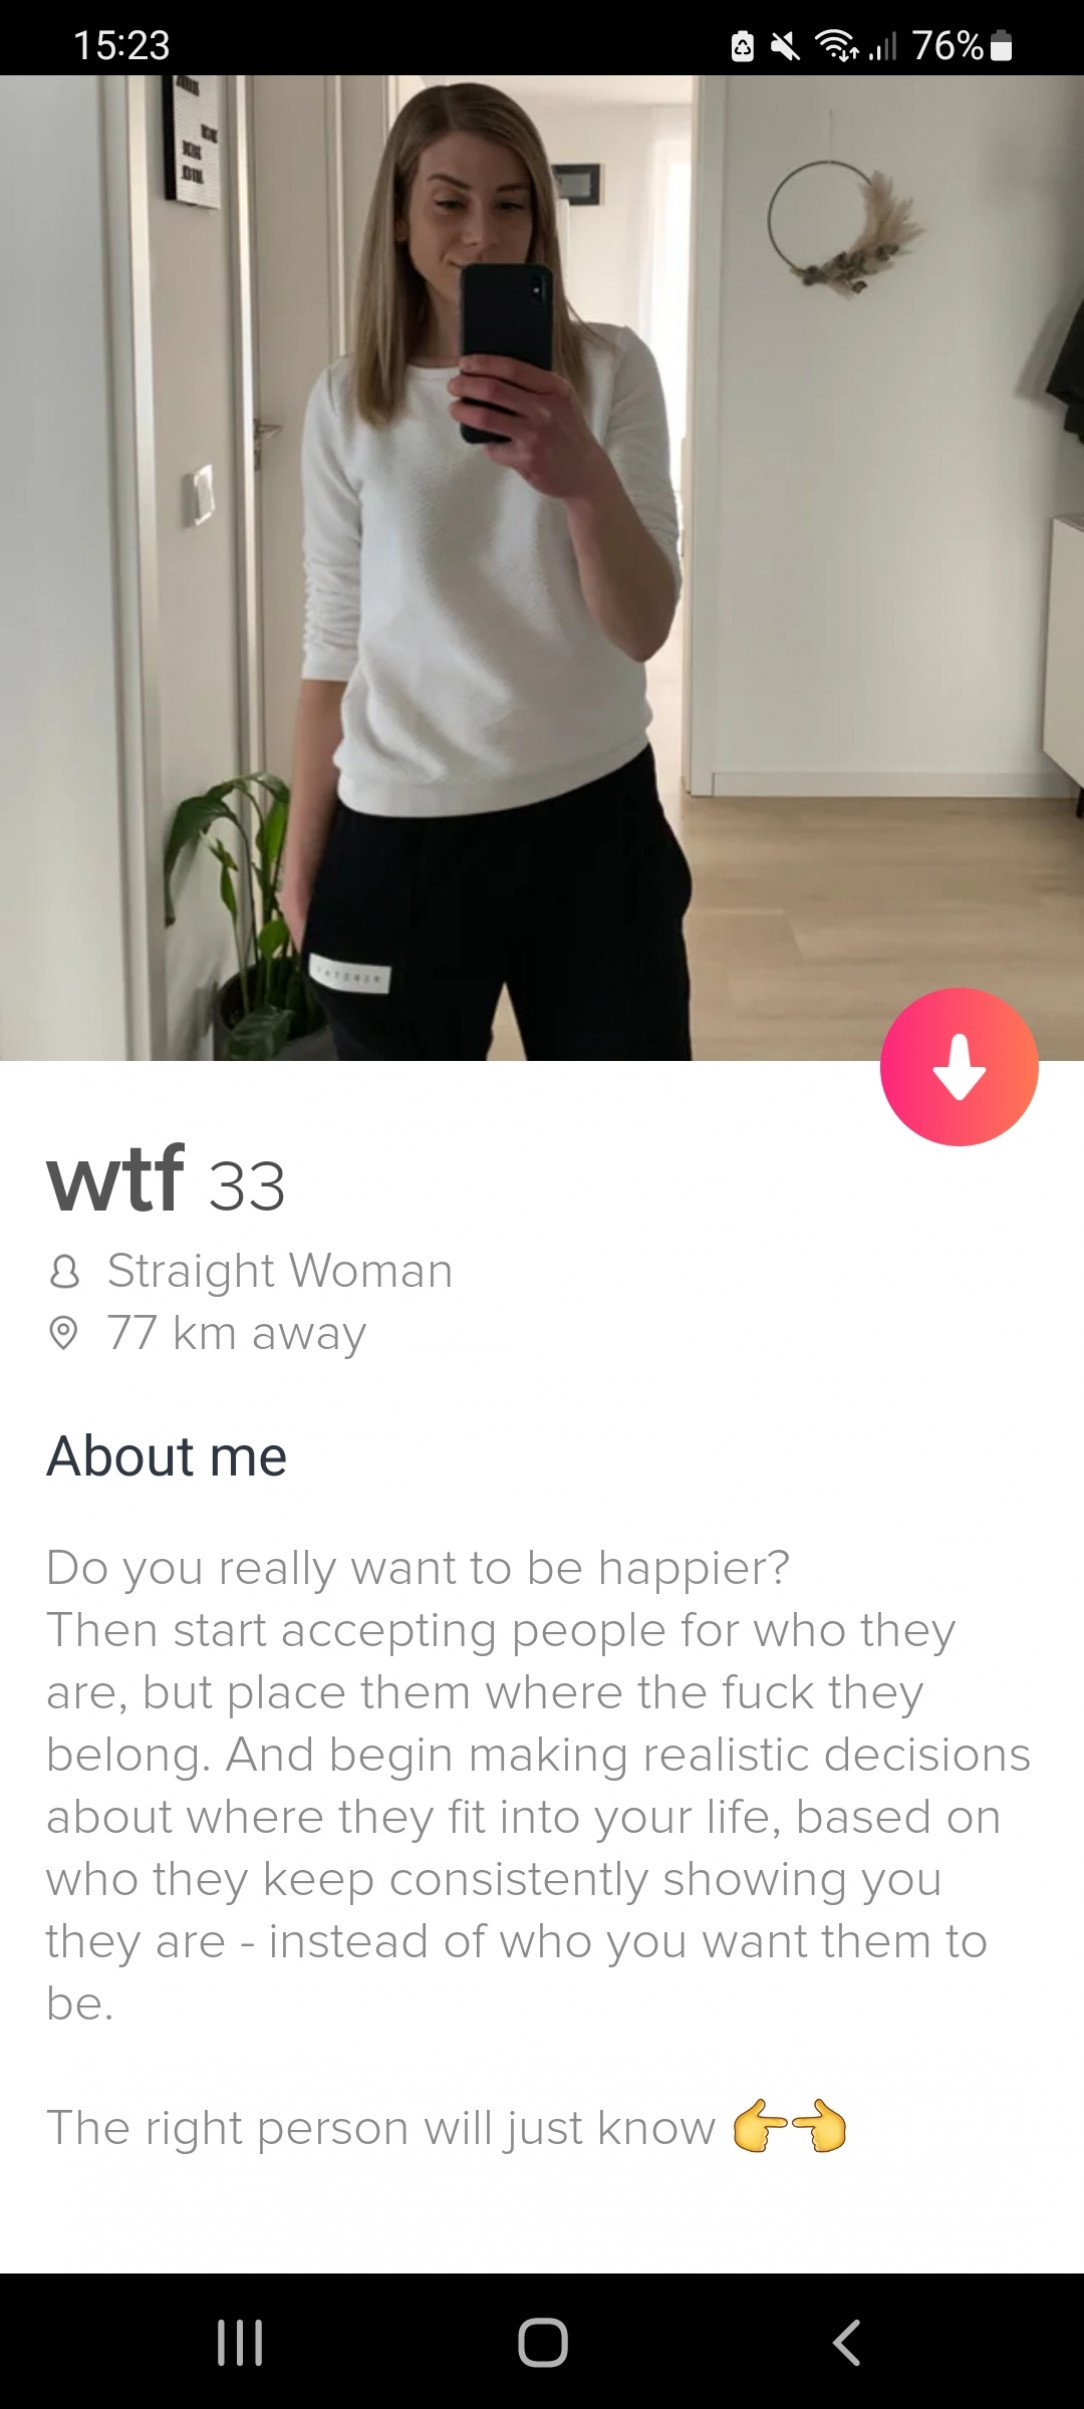 Her Bio Hit Hard. Life lessons from Tinder